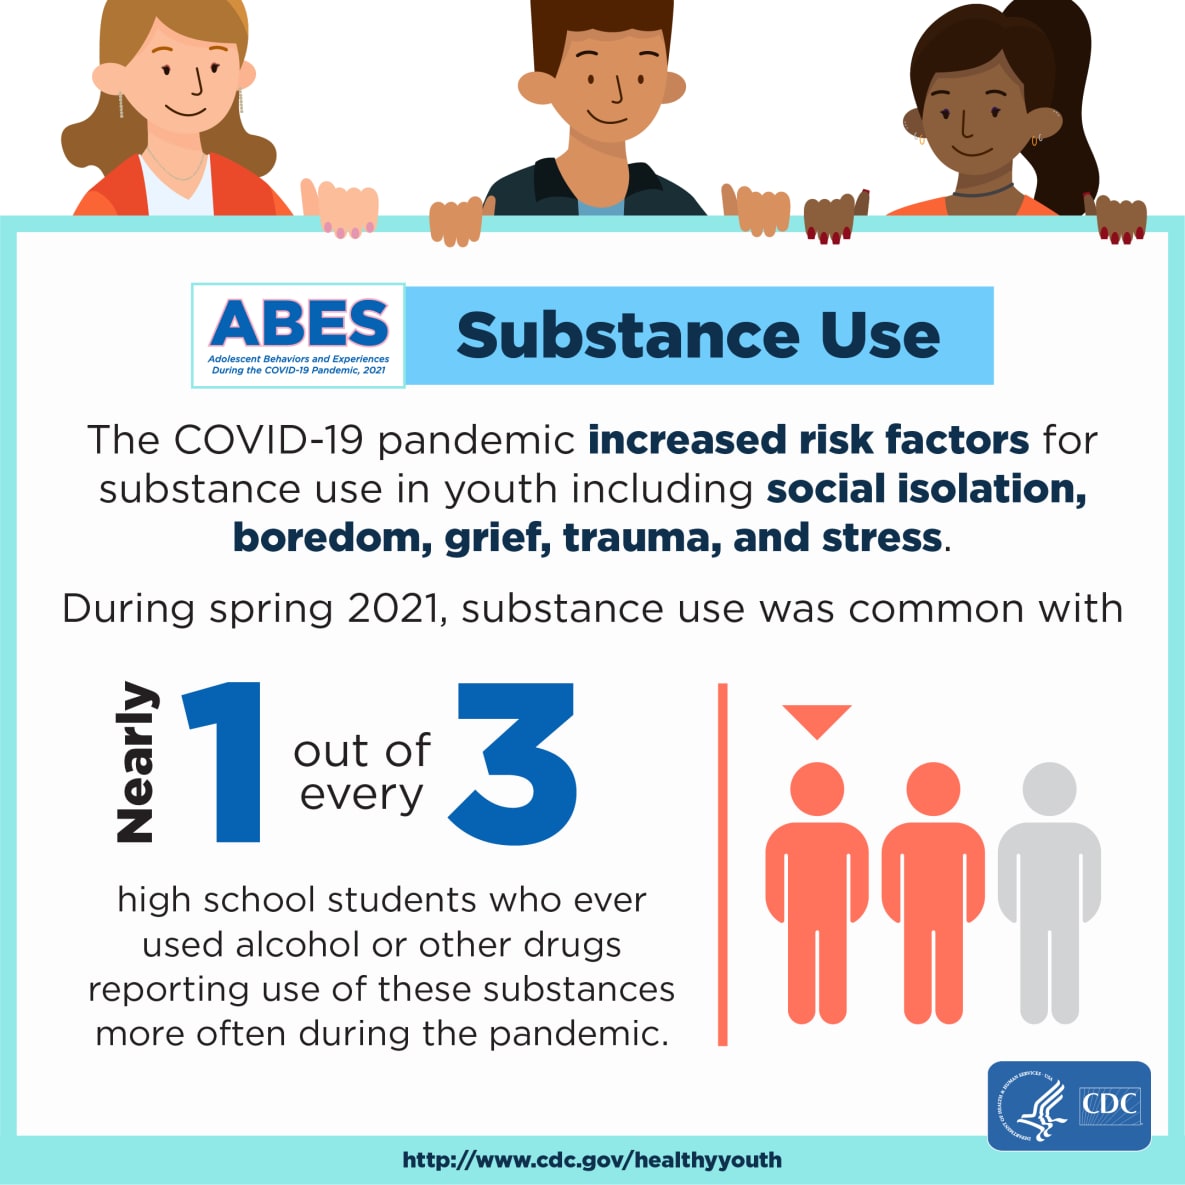 DASH ABES Social Substance Use infographic